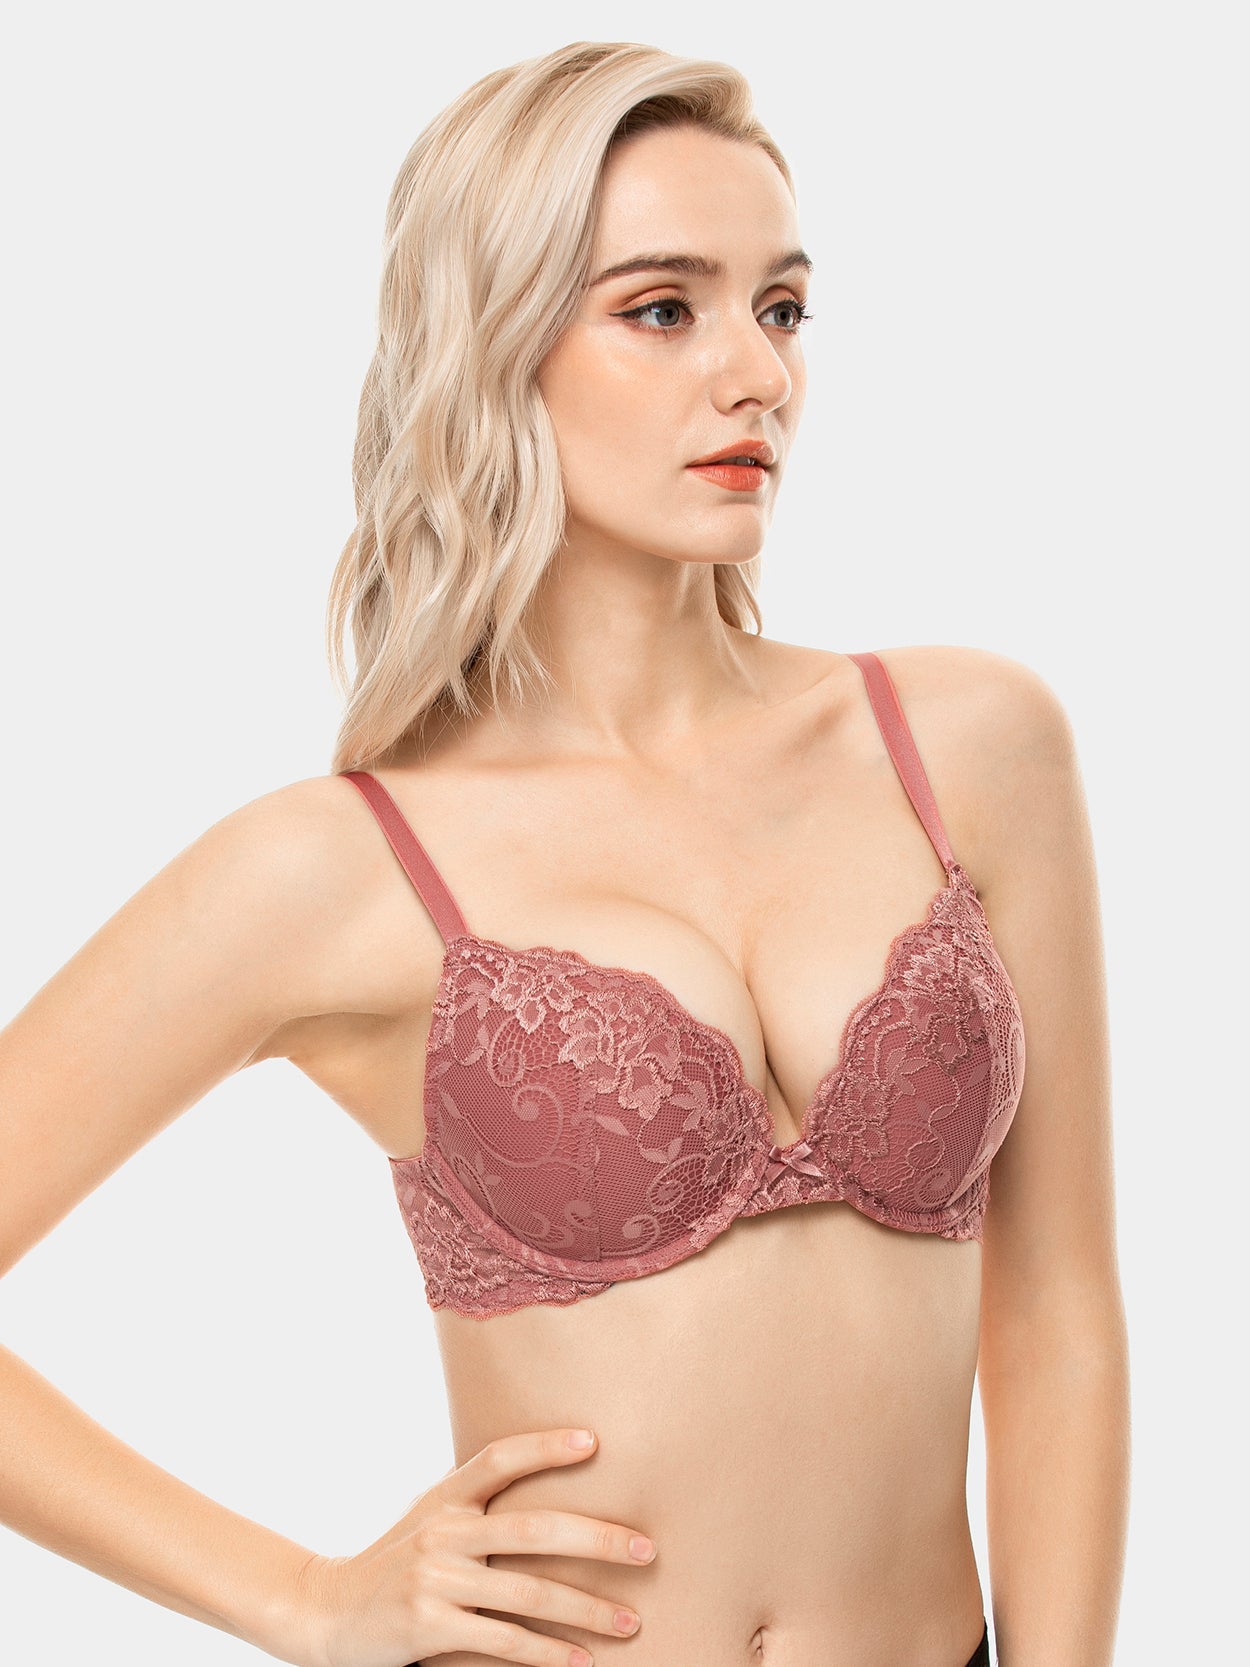 HONEST review of the Pink Deyllo Push Up Lace Bra 